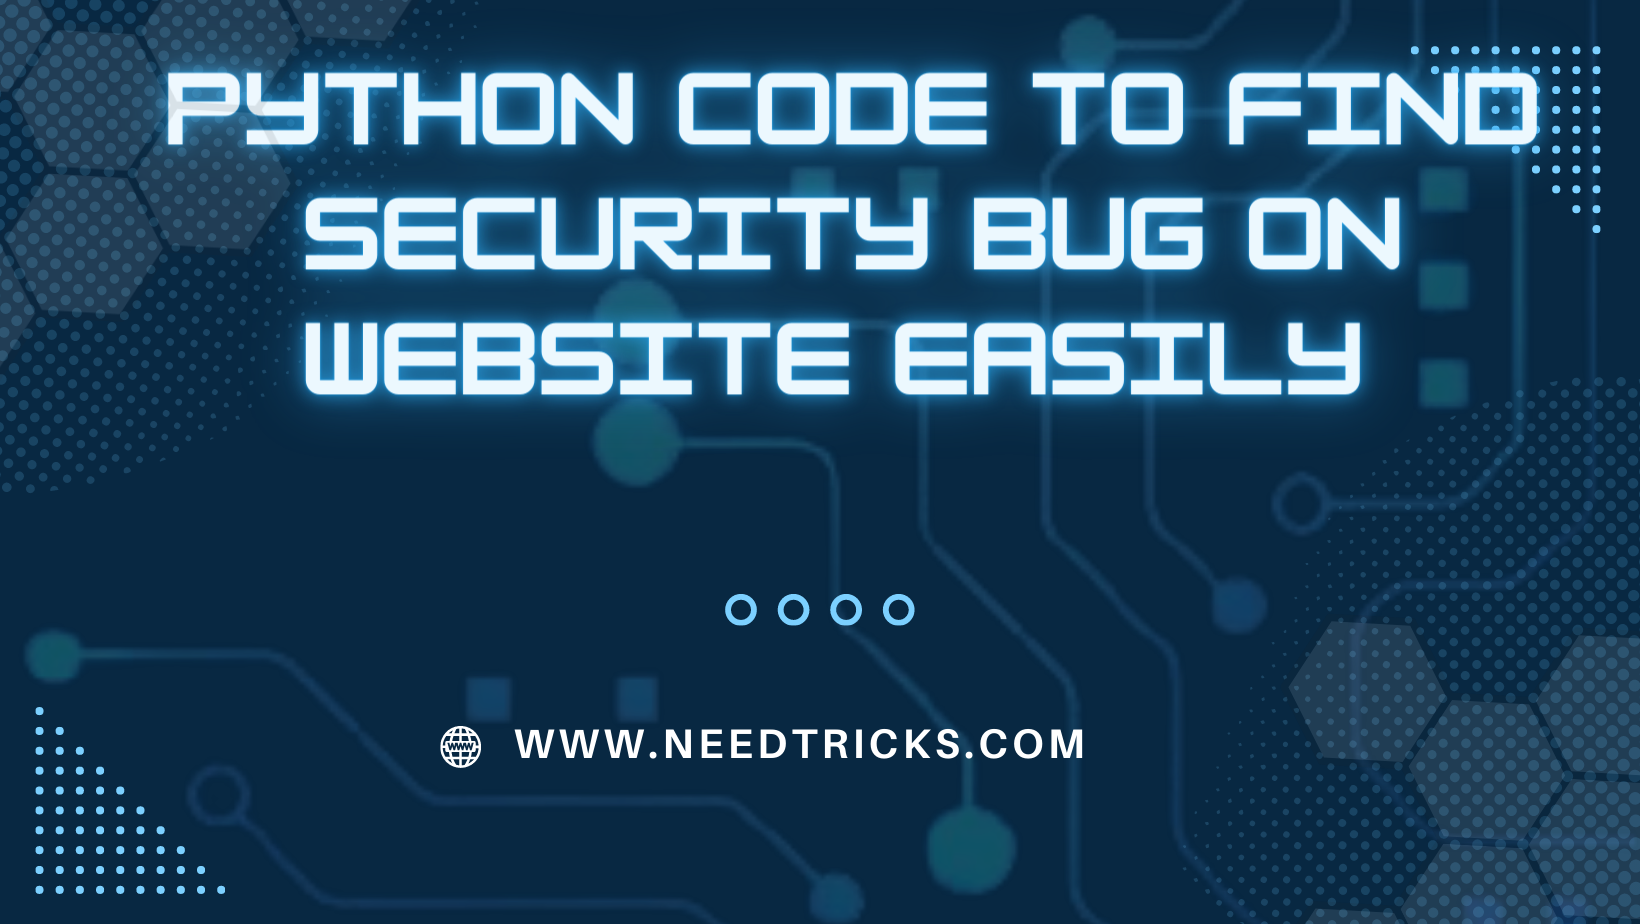 Python code to find security bug on website Easily